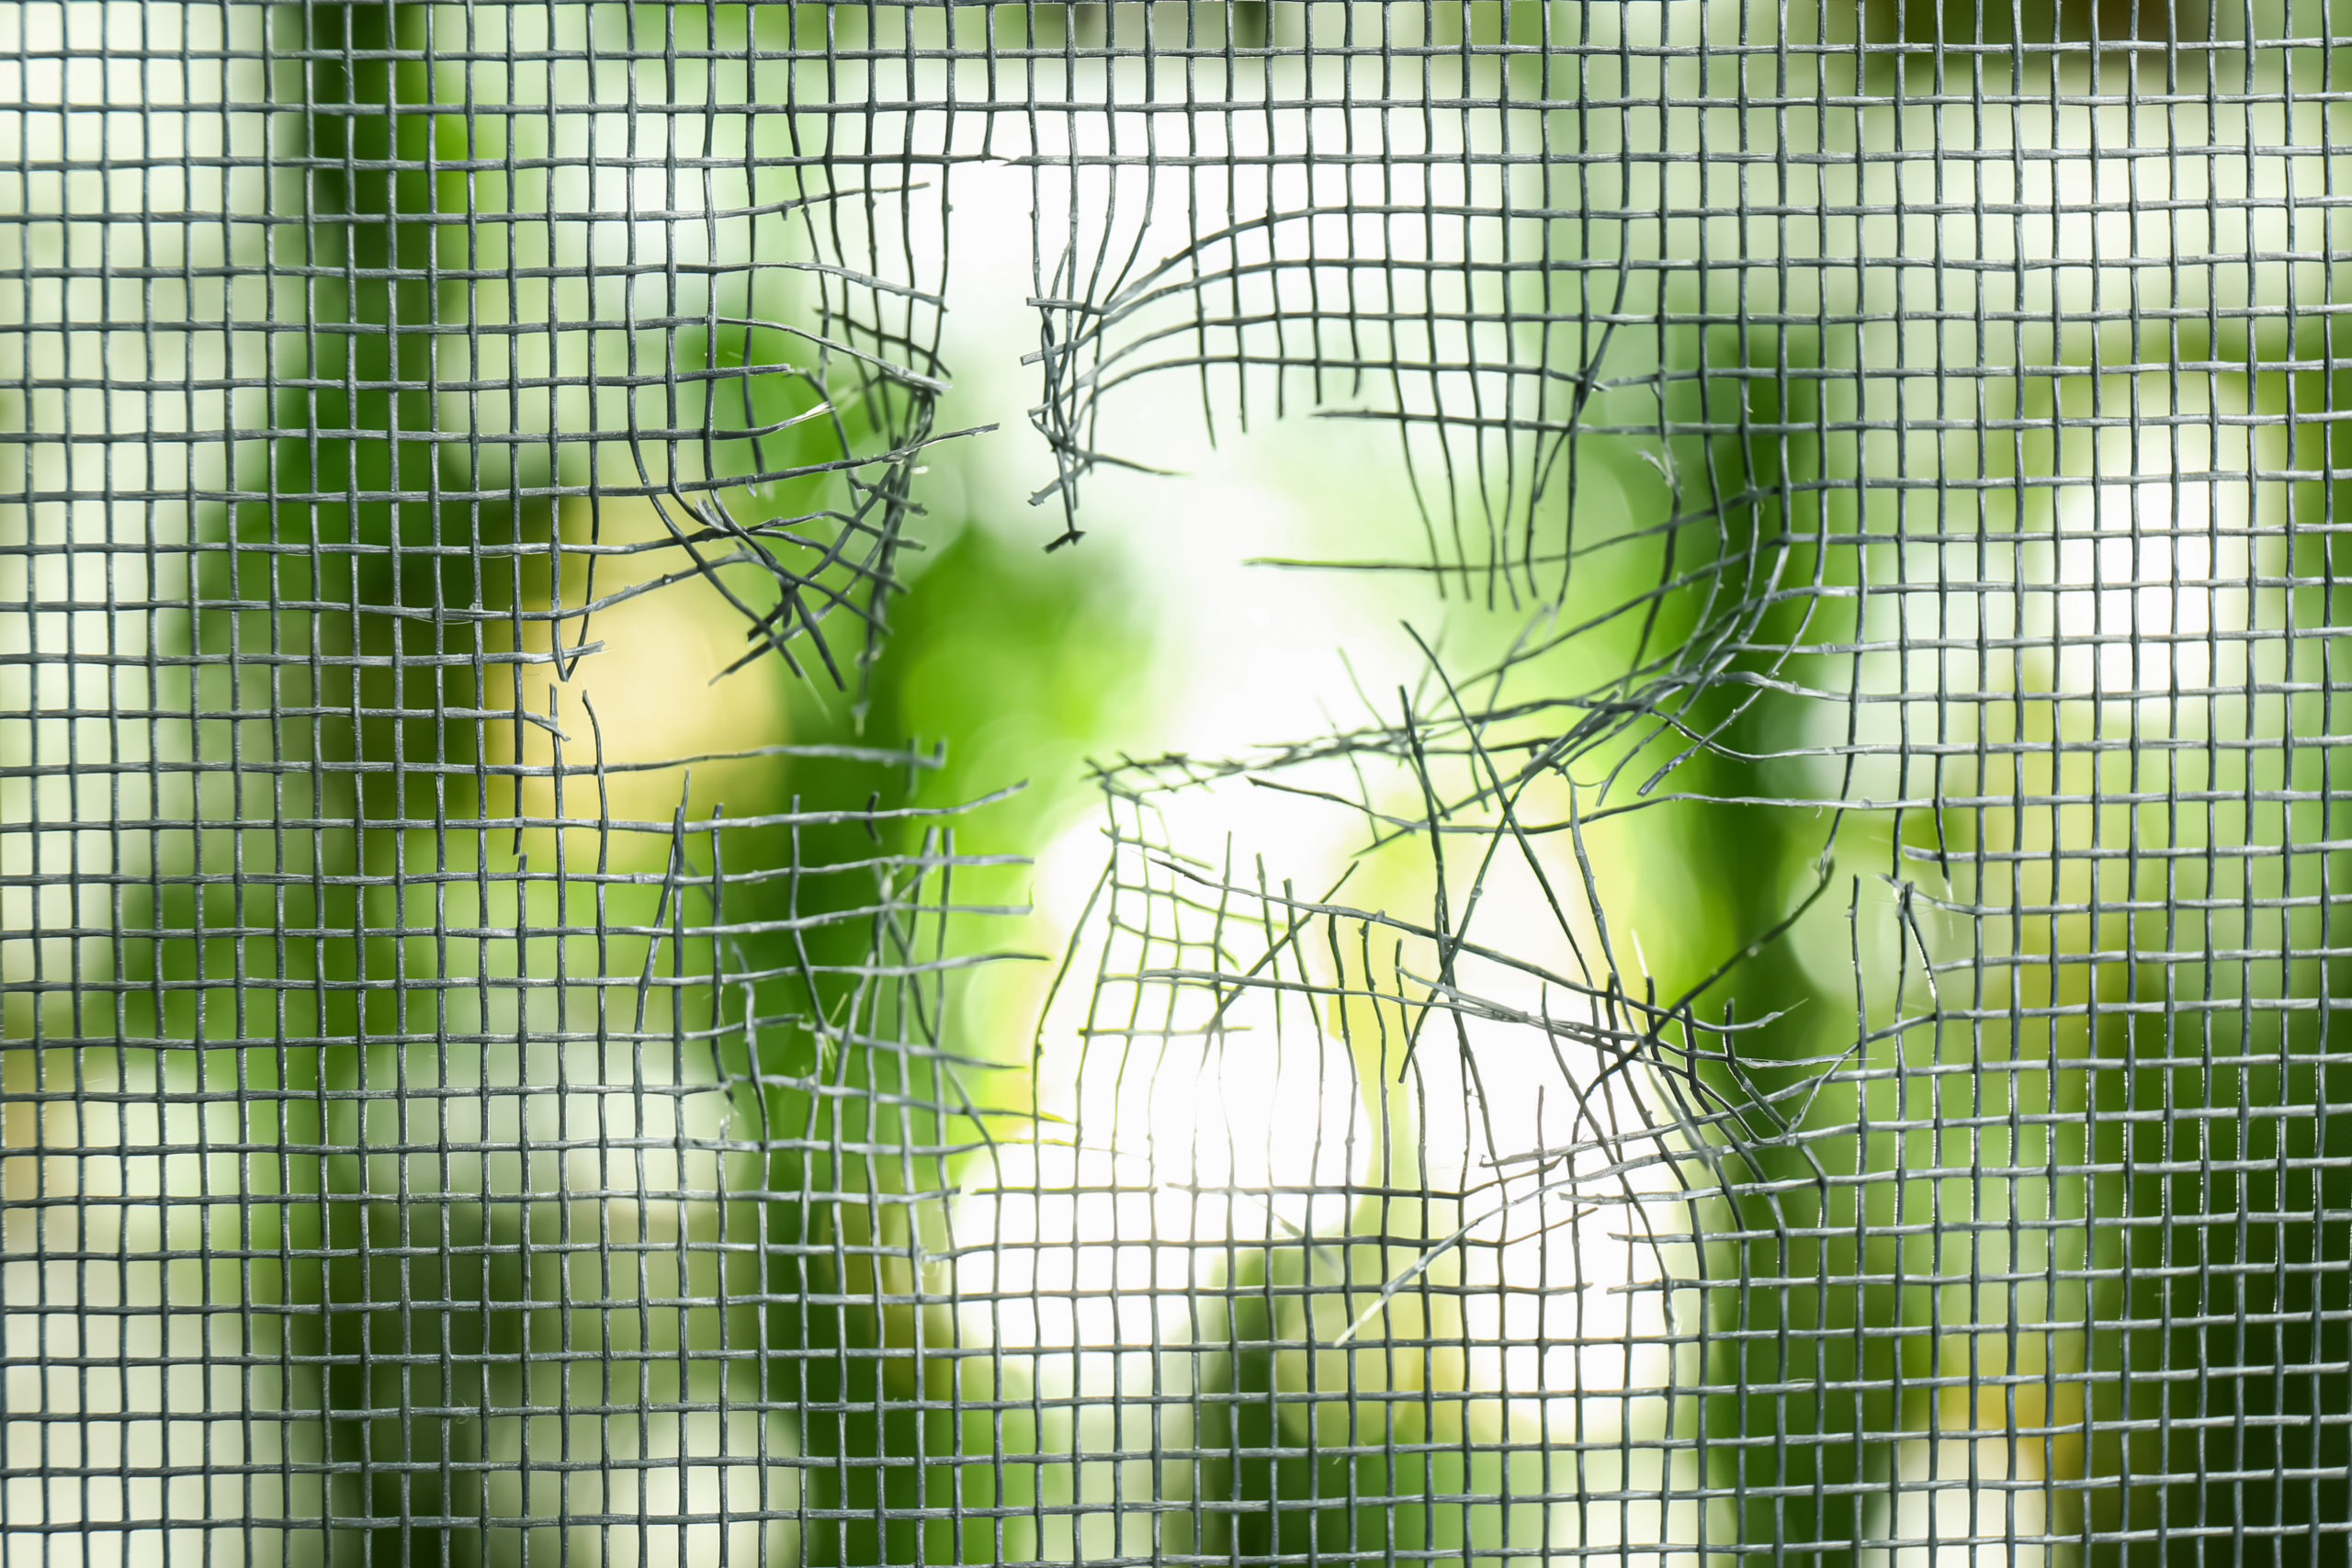 Torn window screen with blurred green background